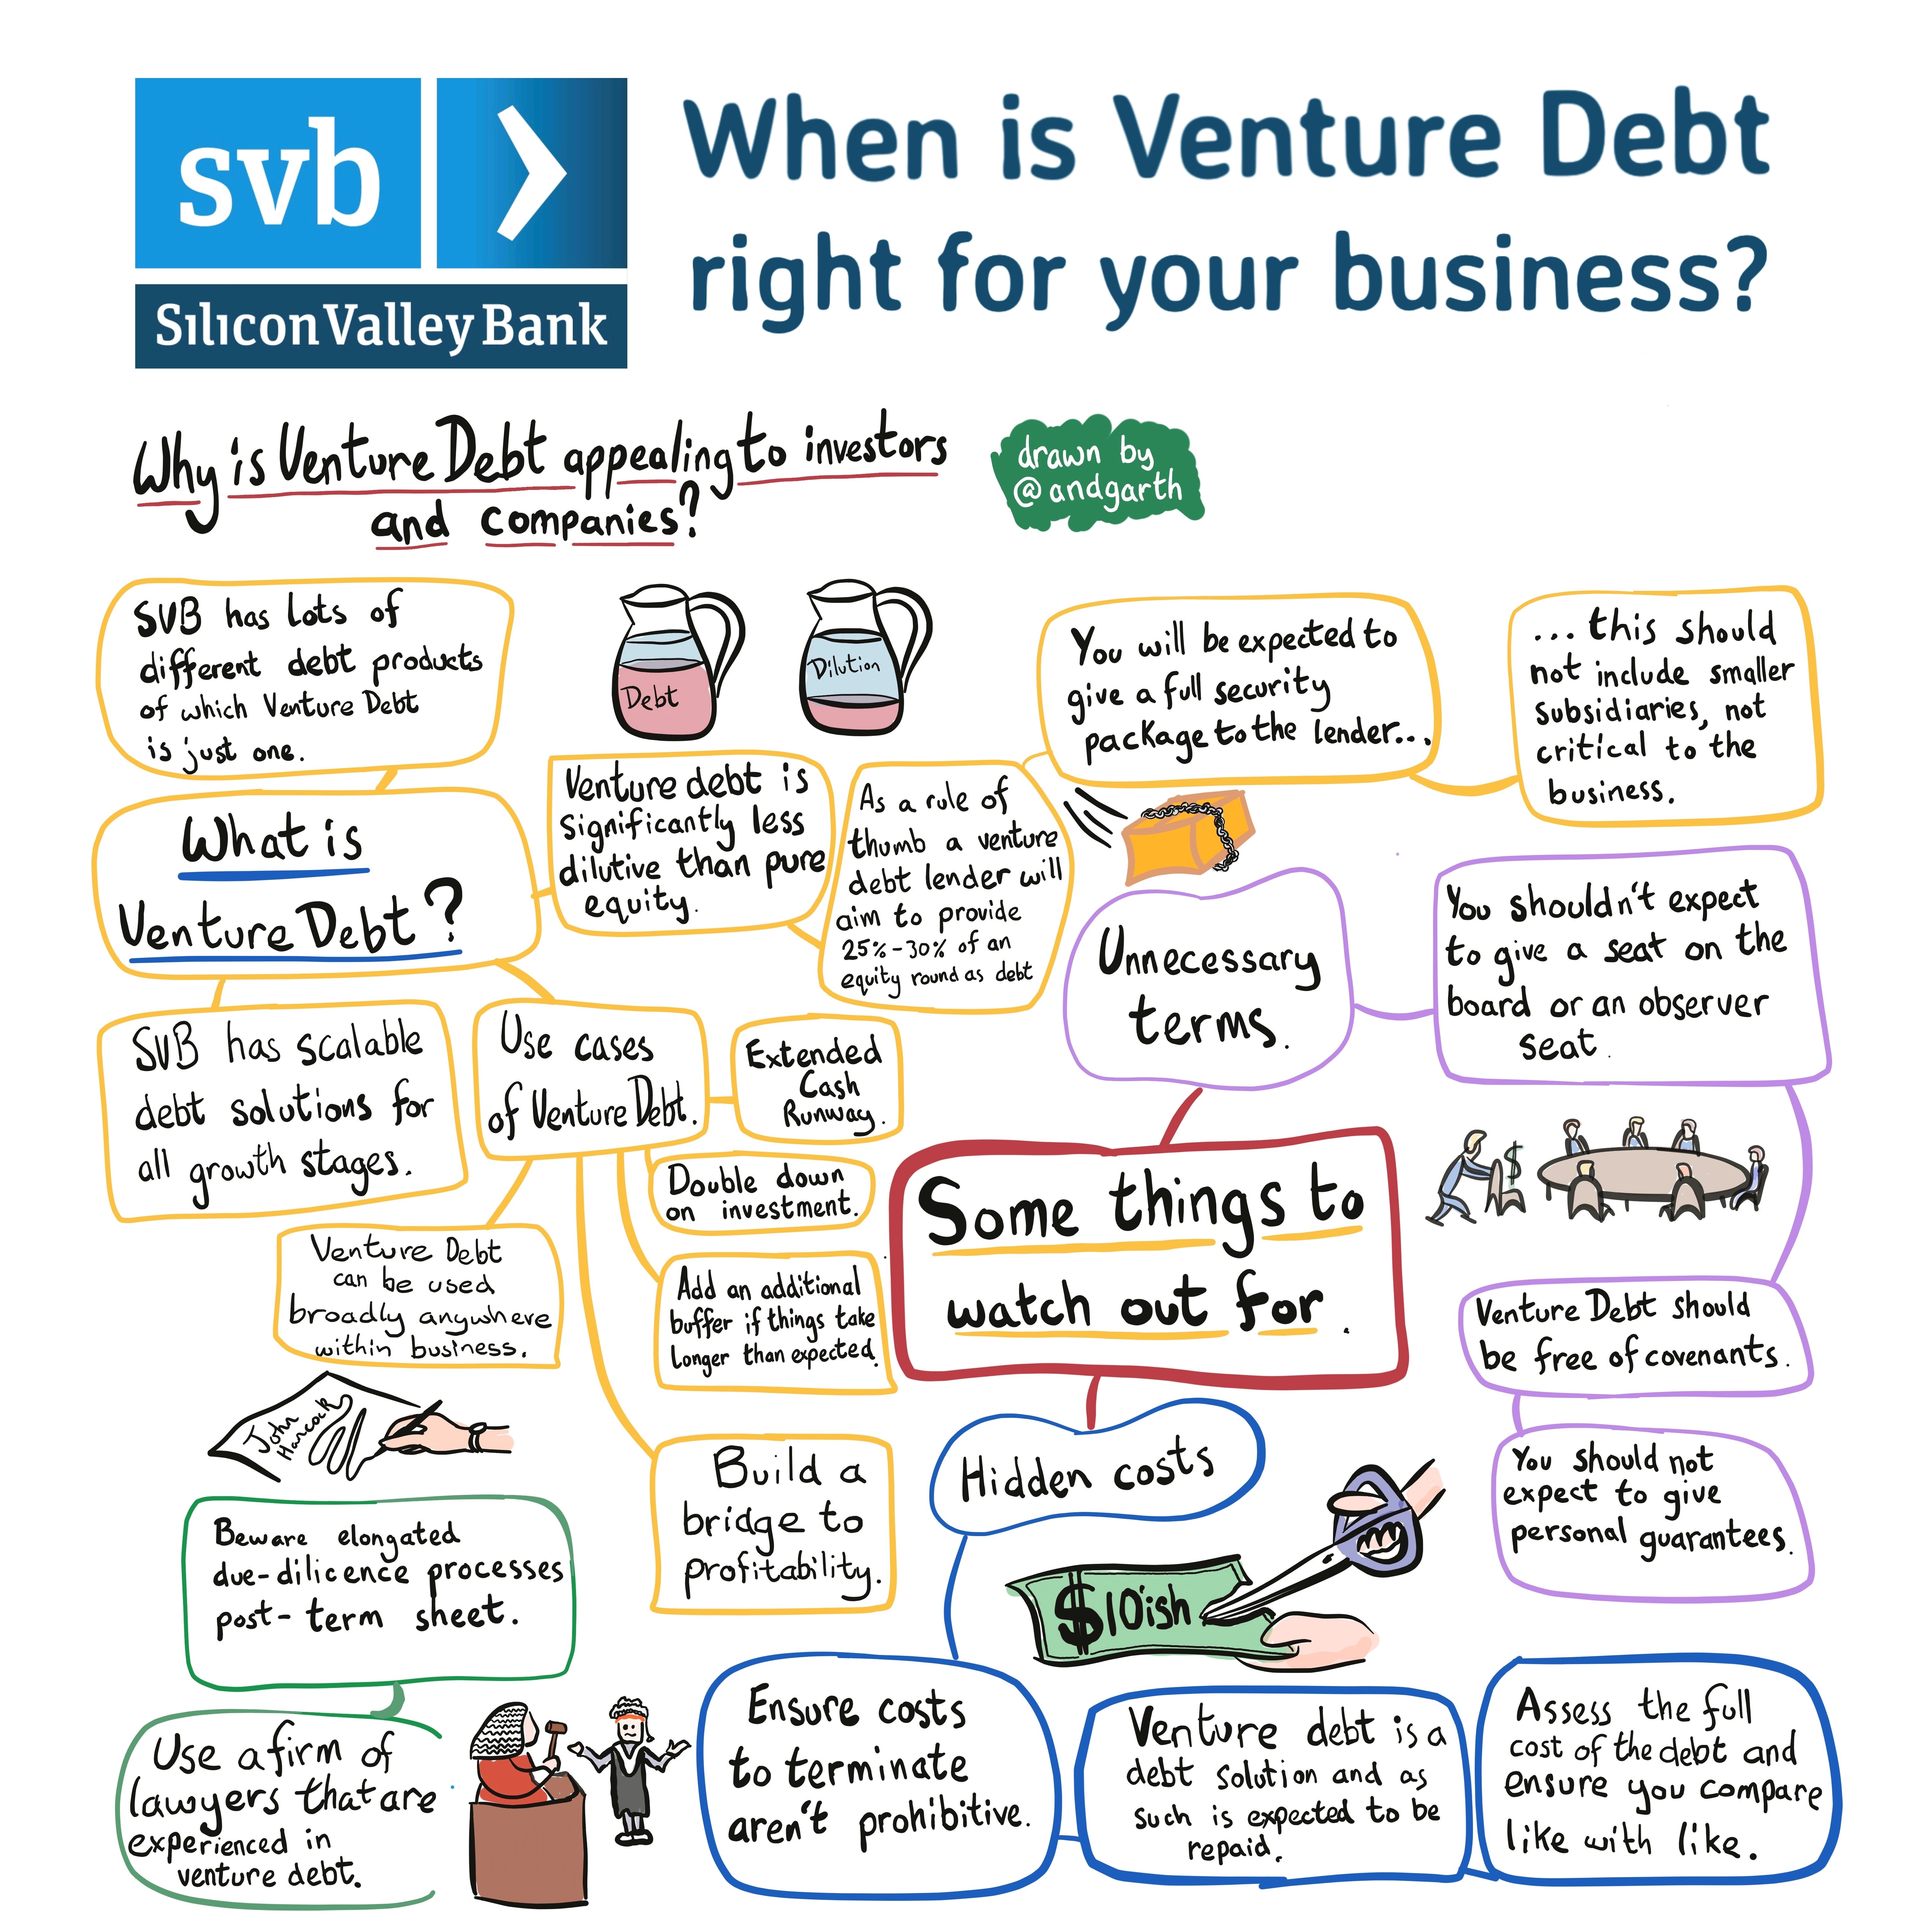 When does a company qualify for venture debt?